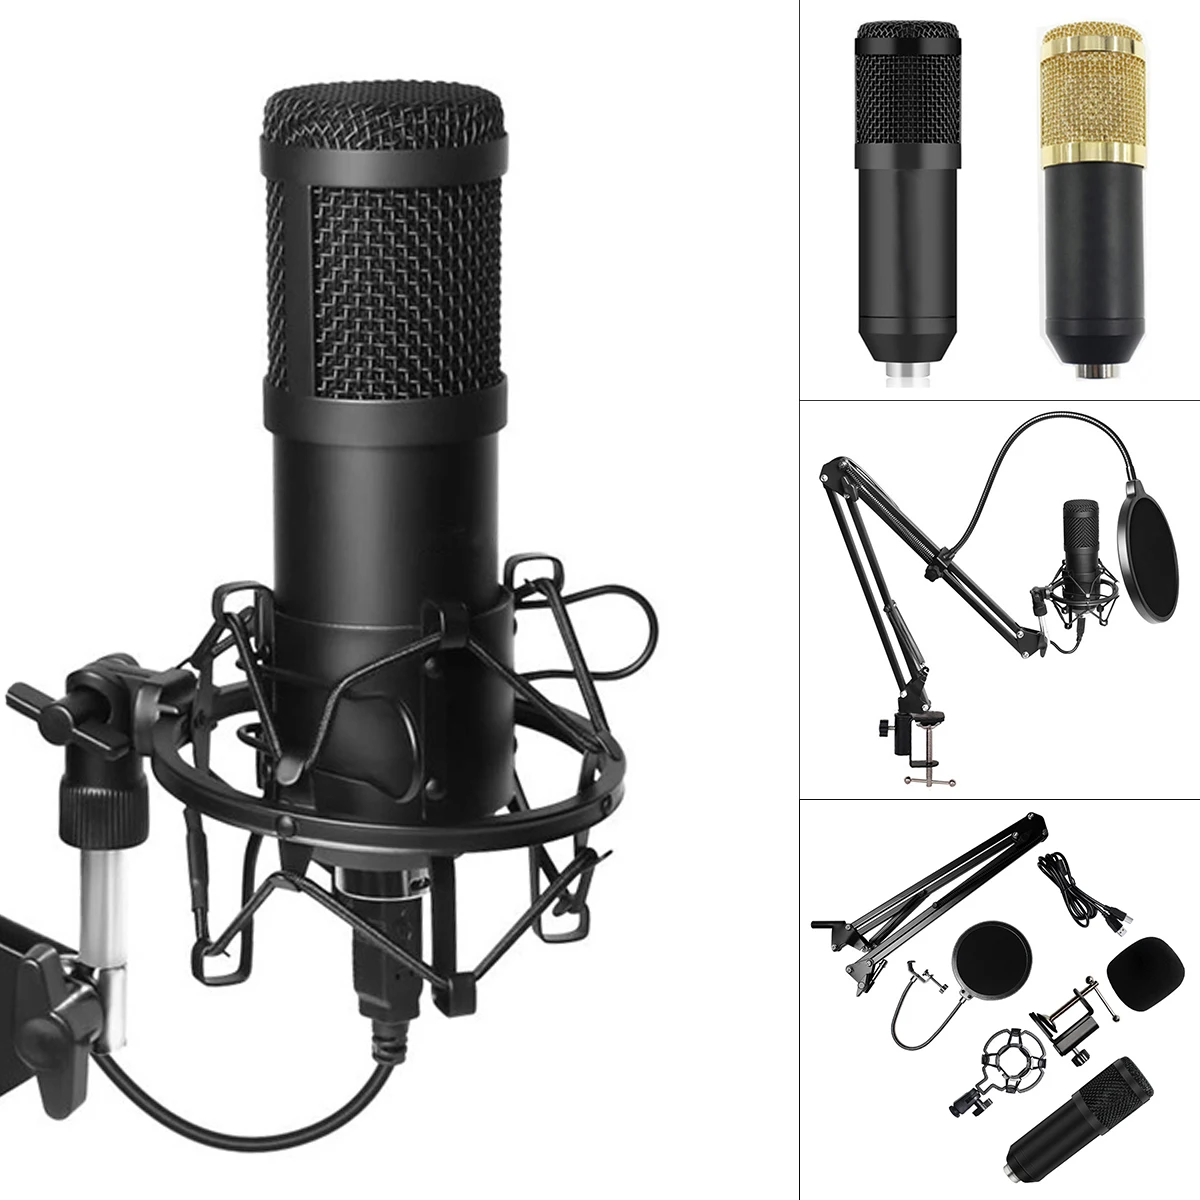 USB Condenser Microphone 192KHz / 24Bit Microphone Kits for Computer Karaoke Microphone for Sound / Studio Recording / Live